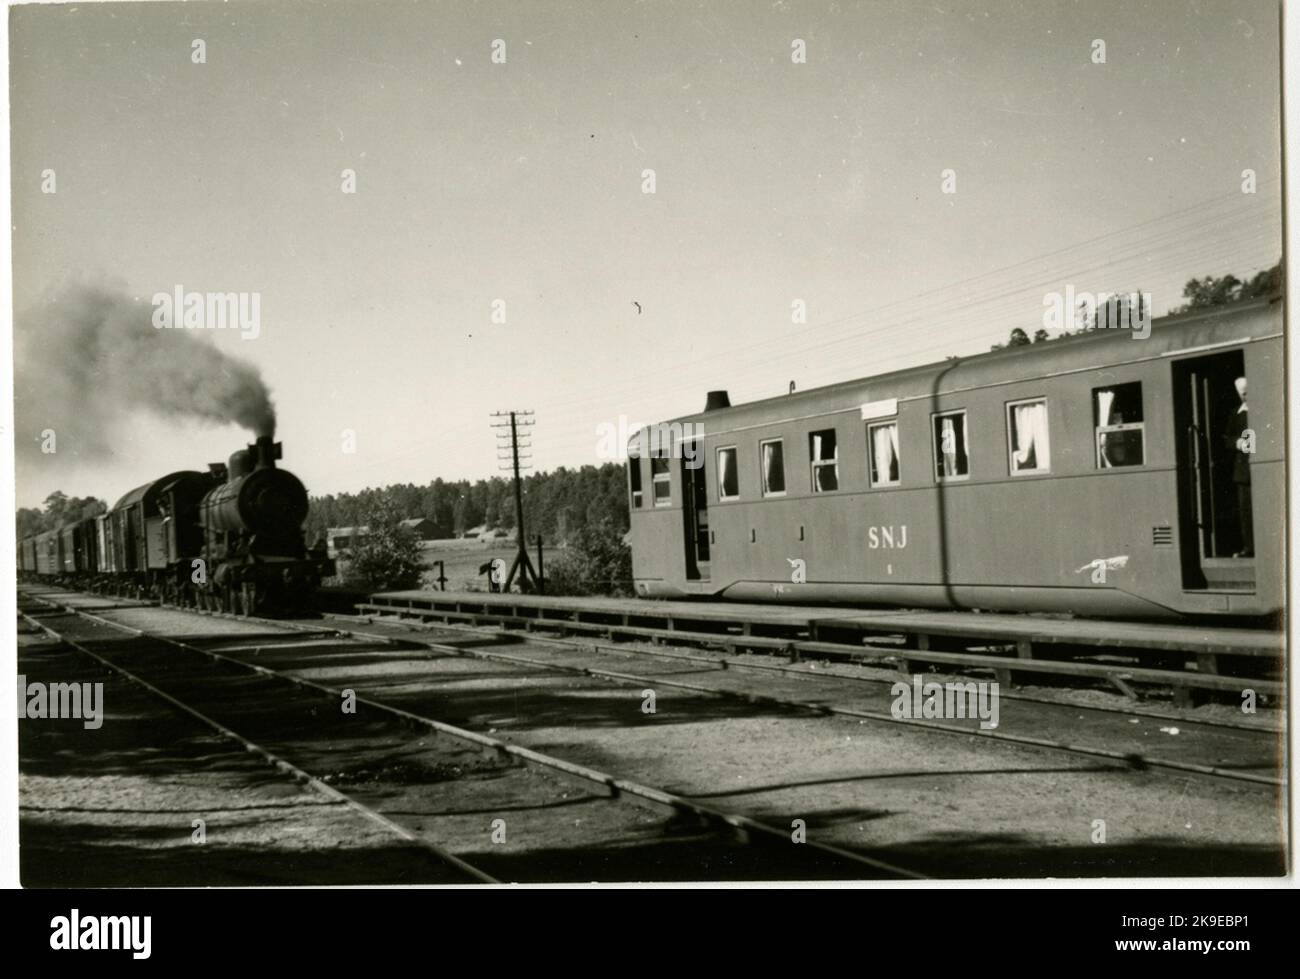 SNJ 5, and SNJ 11TEXT on the back of the photo 'Handens station Snj´Gotlandsxpressen 'with Lok no11Snj 5Snj 11foto 1.8.1948 Stock Photo